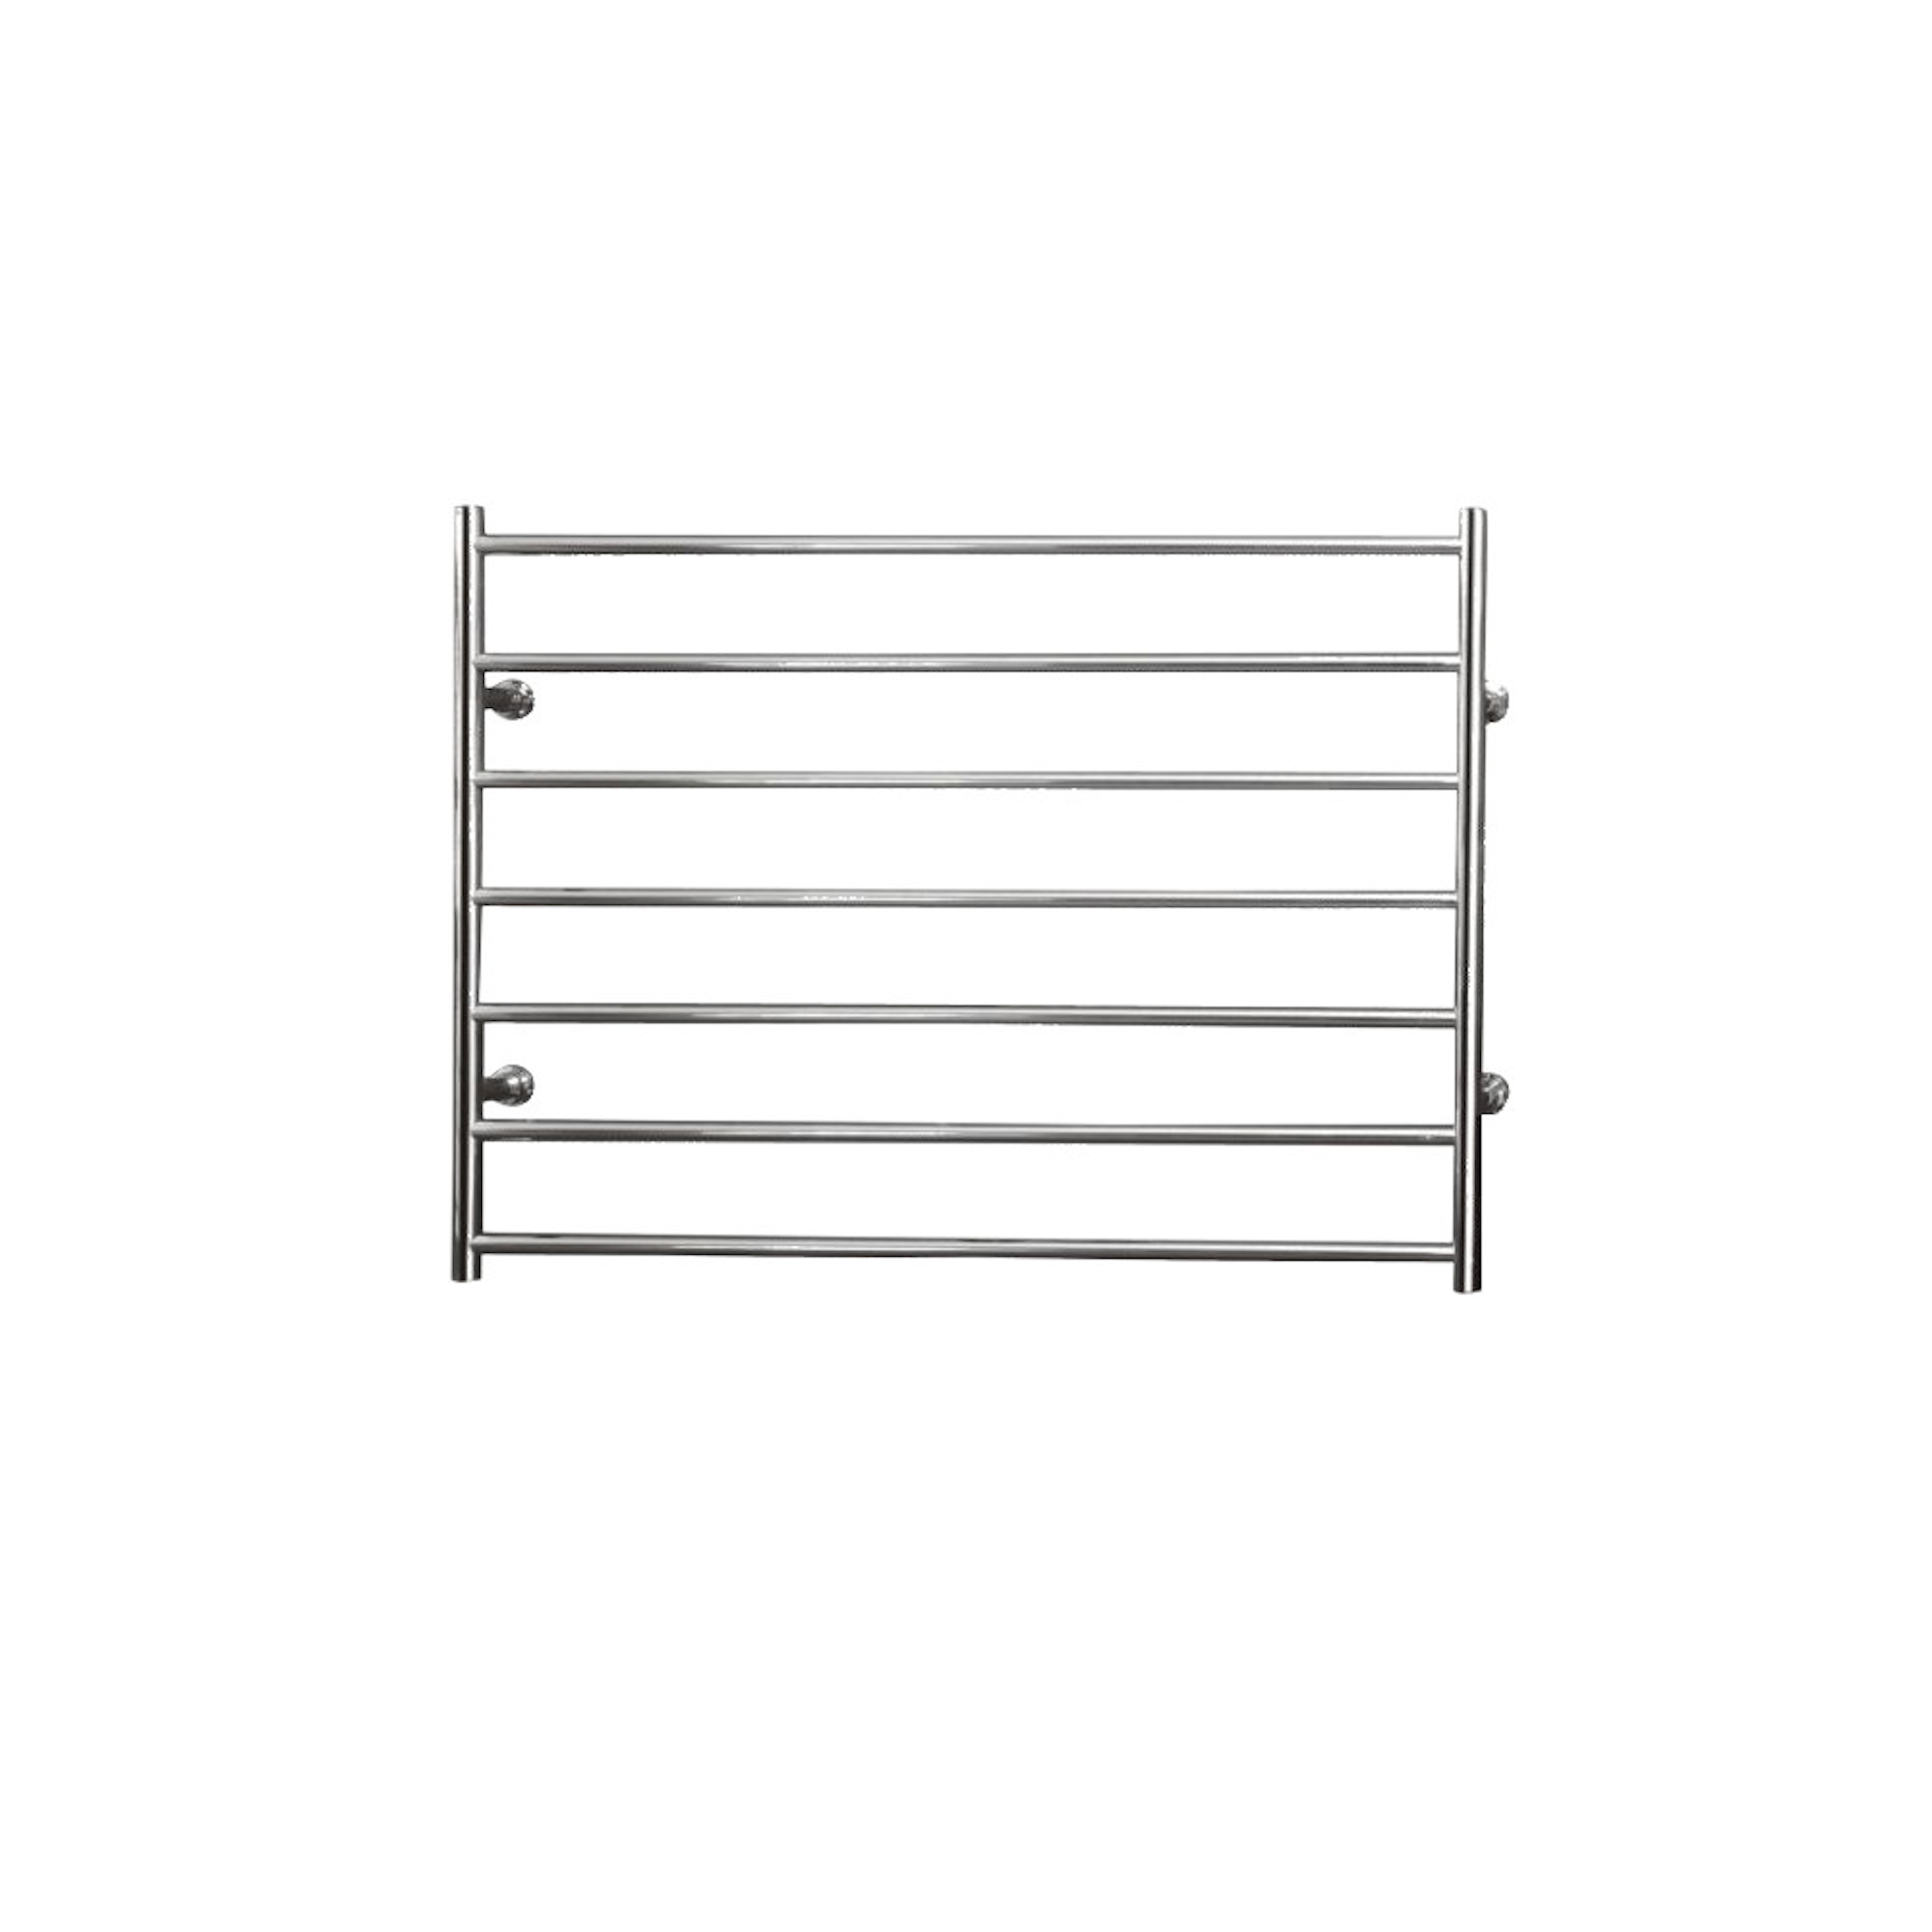 690 x 1200 dry electric towel rail SWITCHED